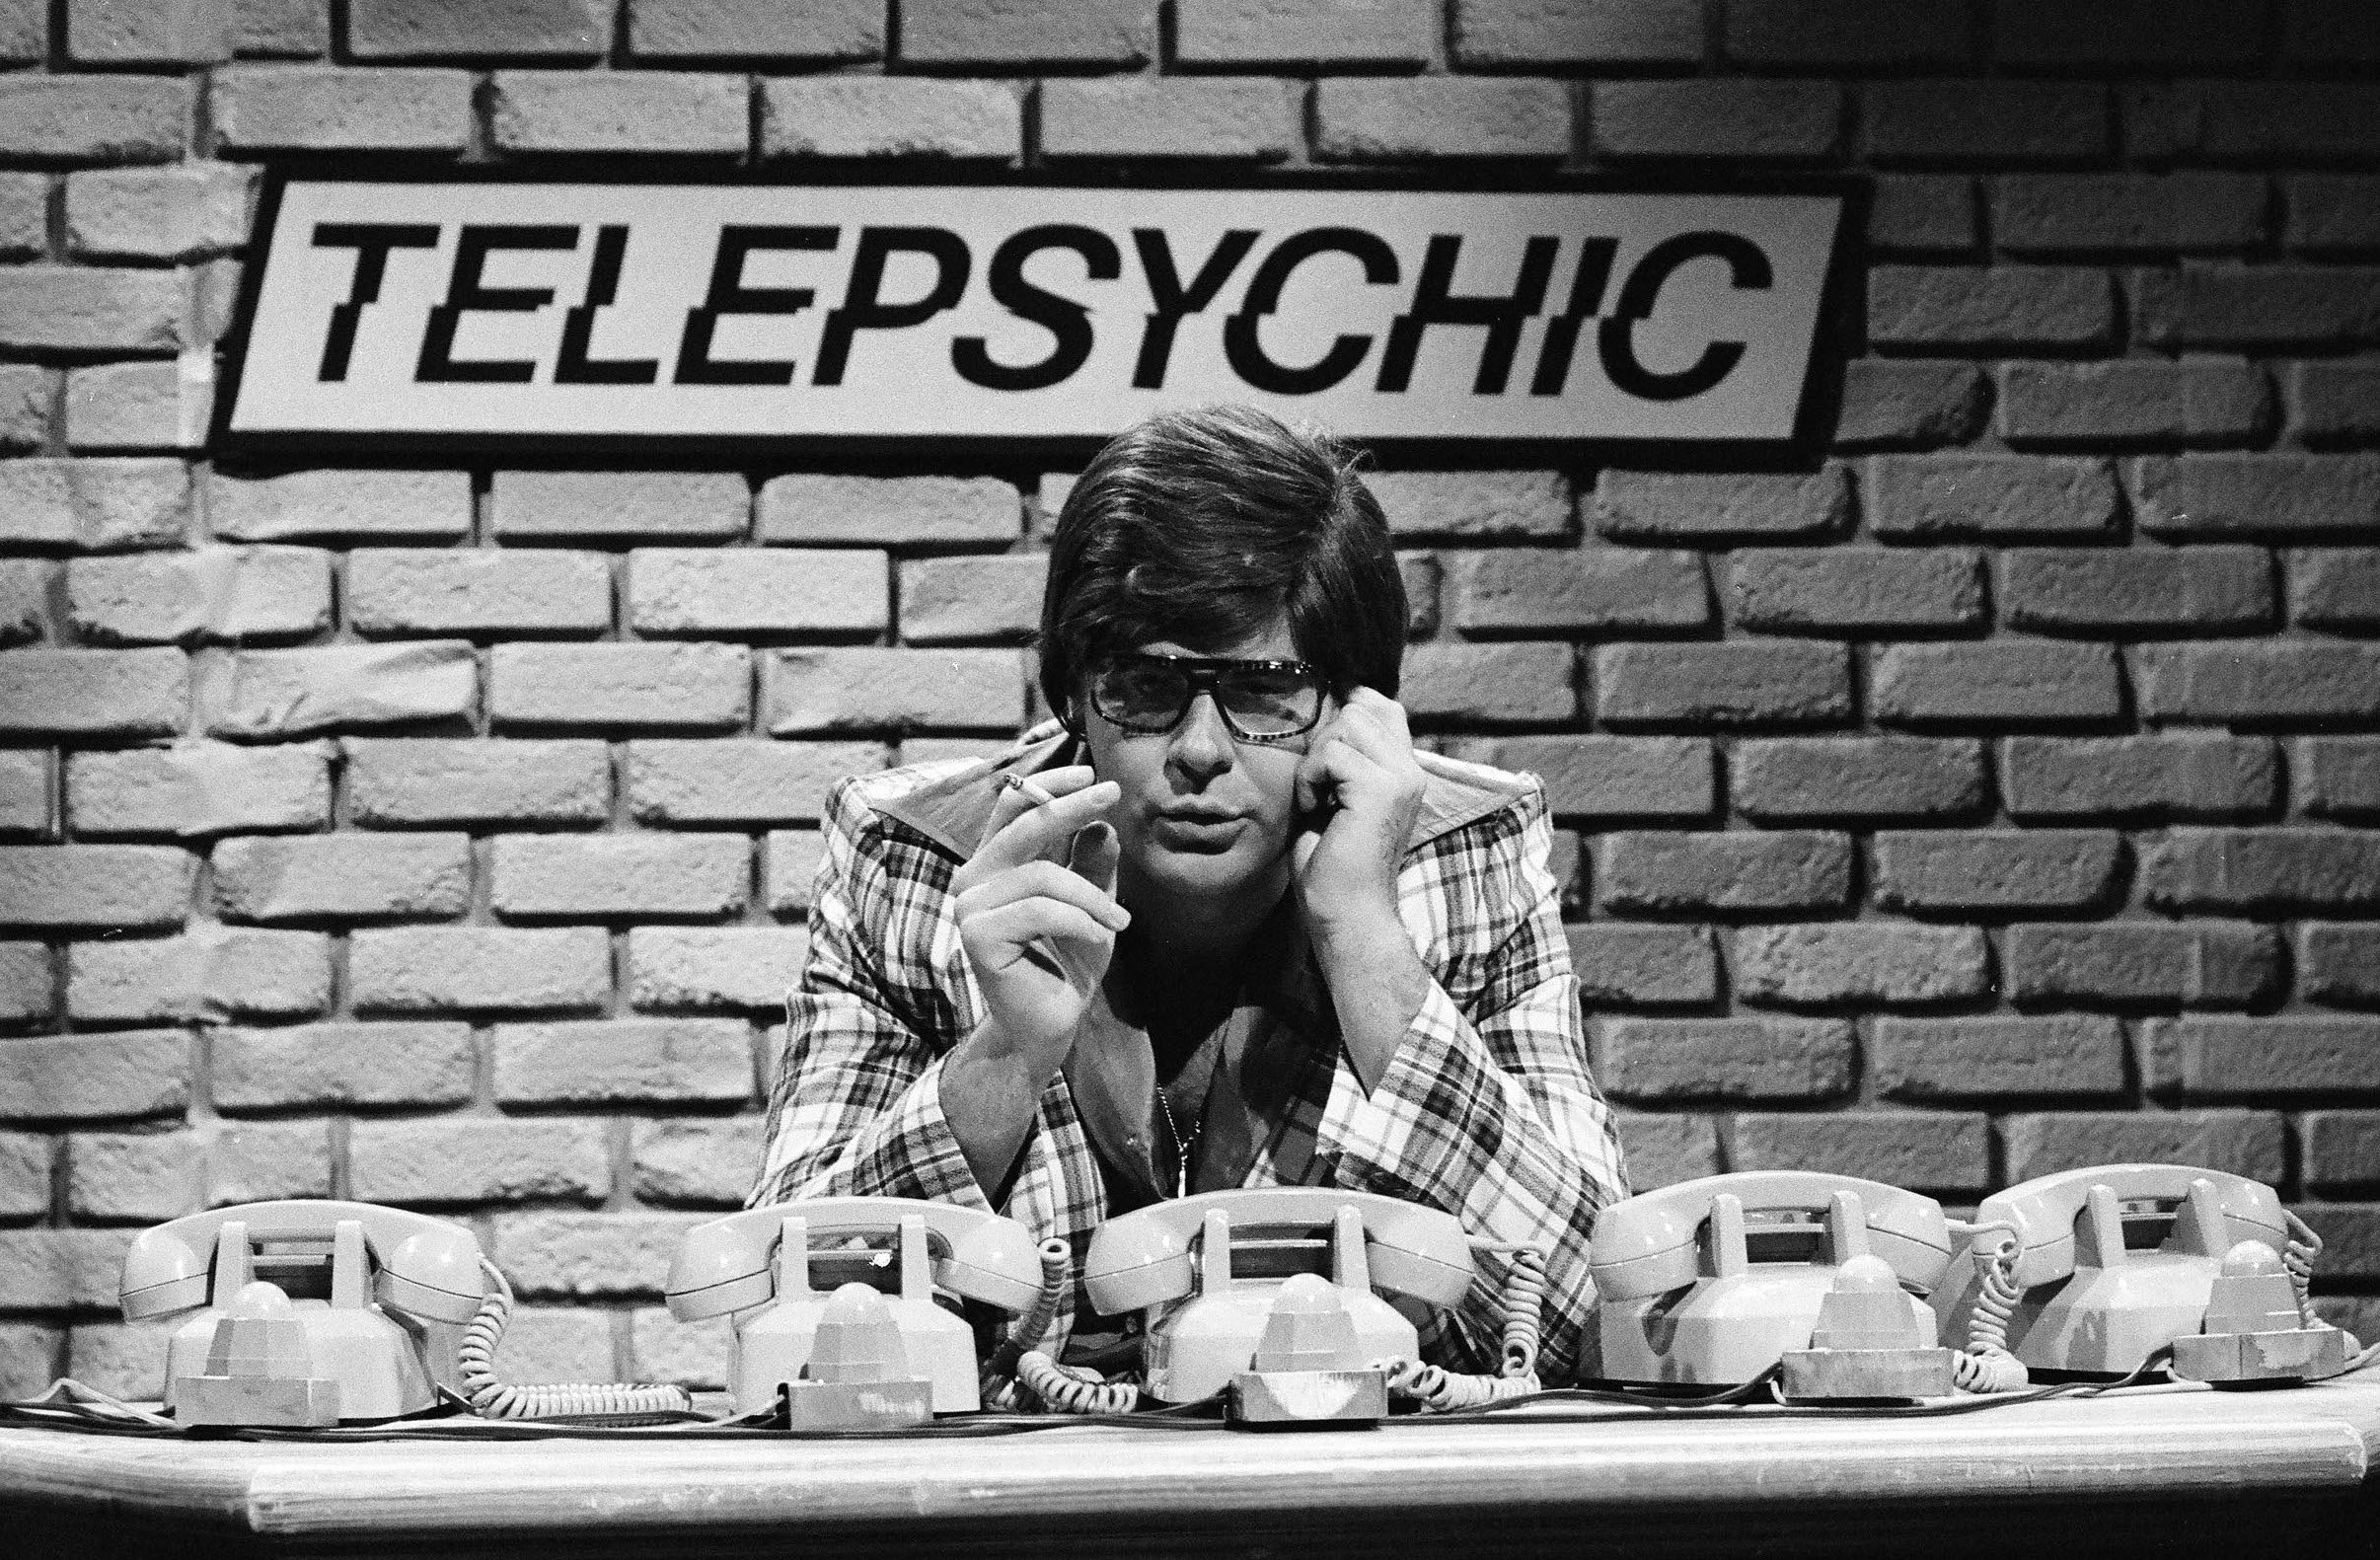 Dan Aykroyd on SNL with a &quot;Telepsychic&quot; sign behind him